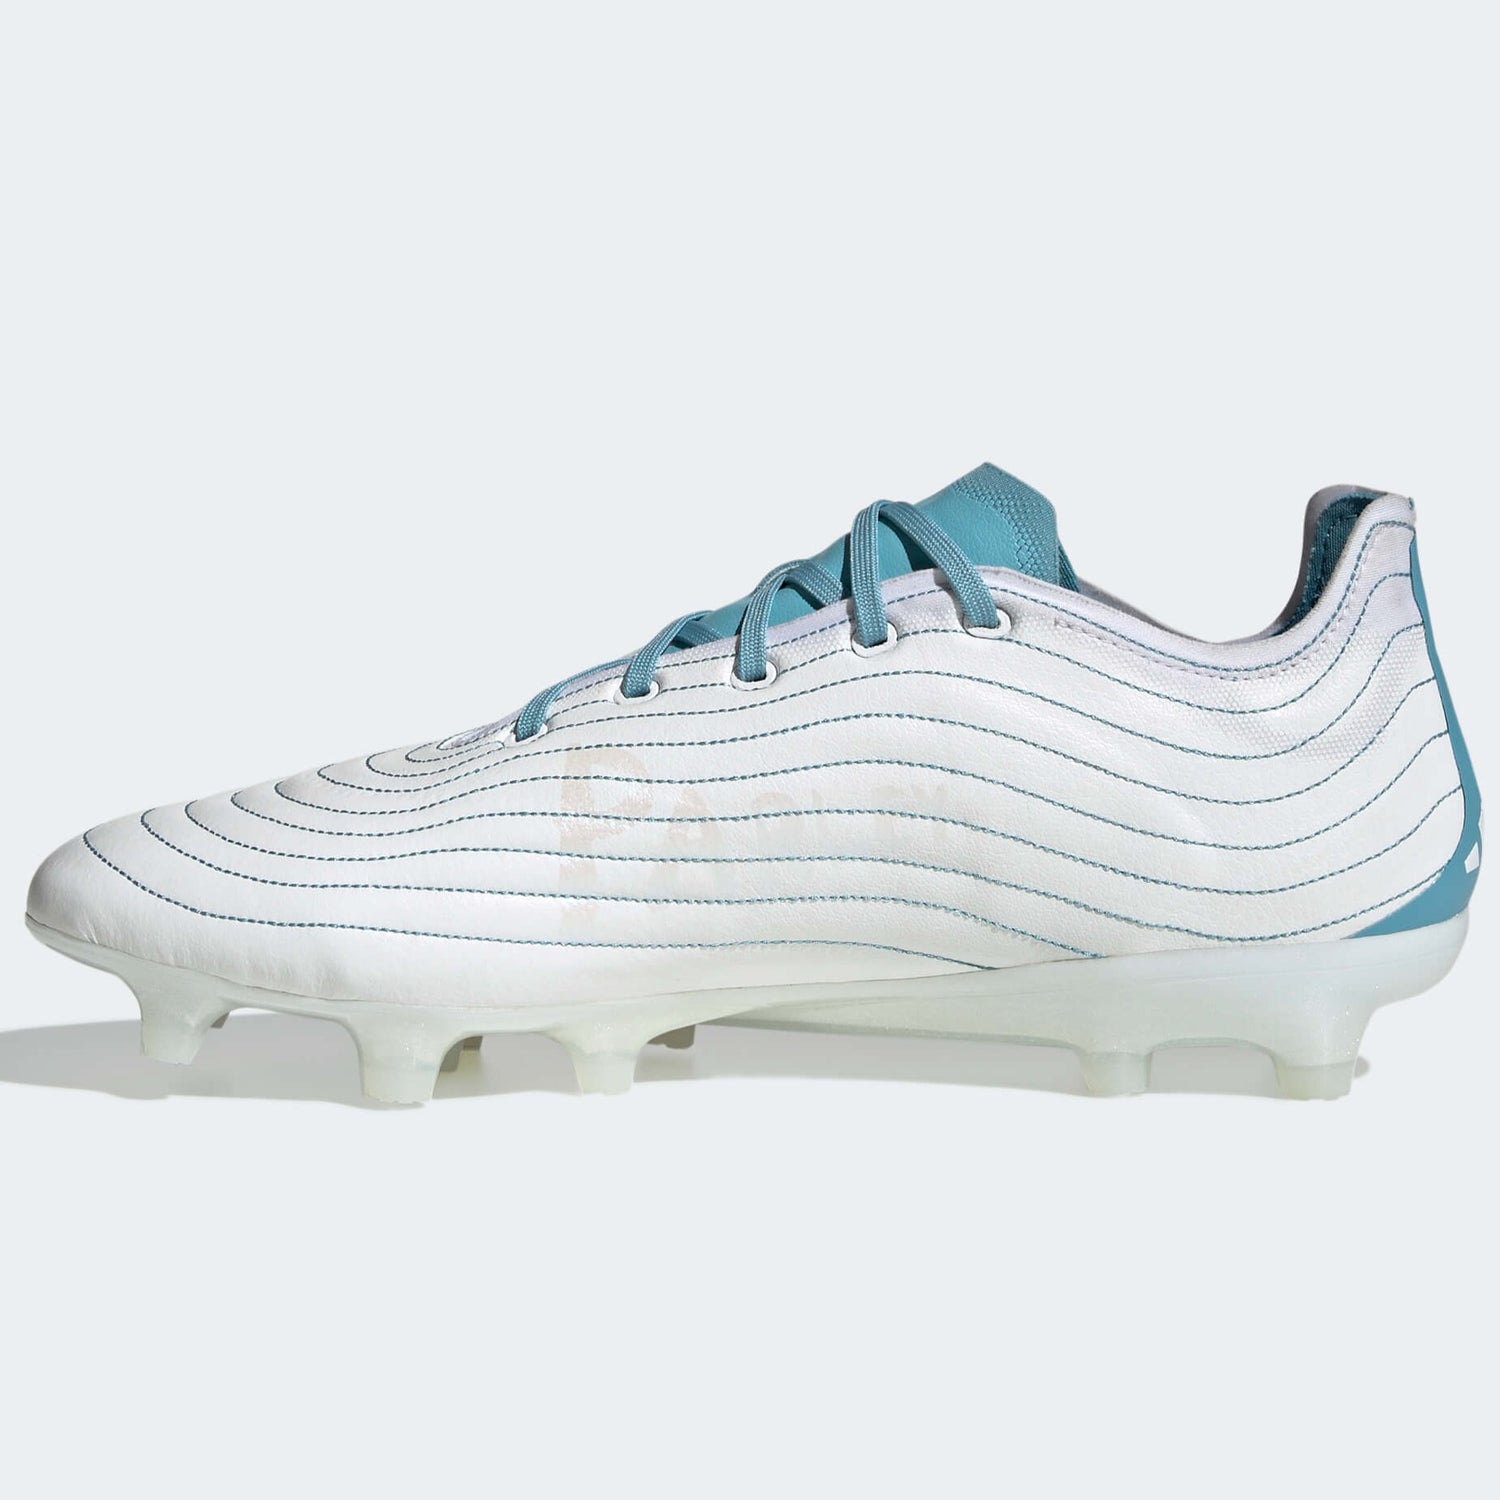 adidas Copa Pure .1 FG - Parley Pack (SP23) (Side 2)